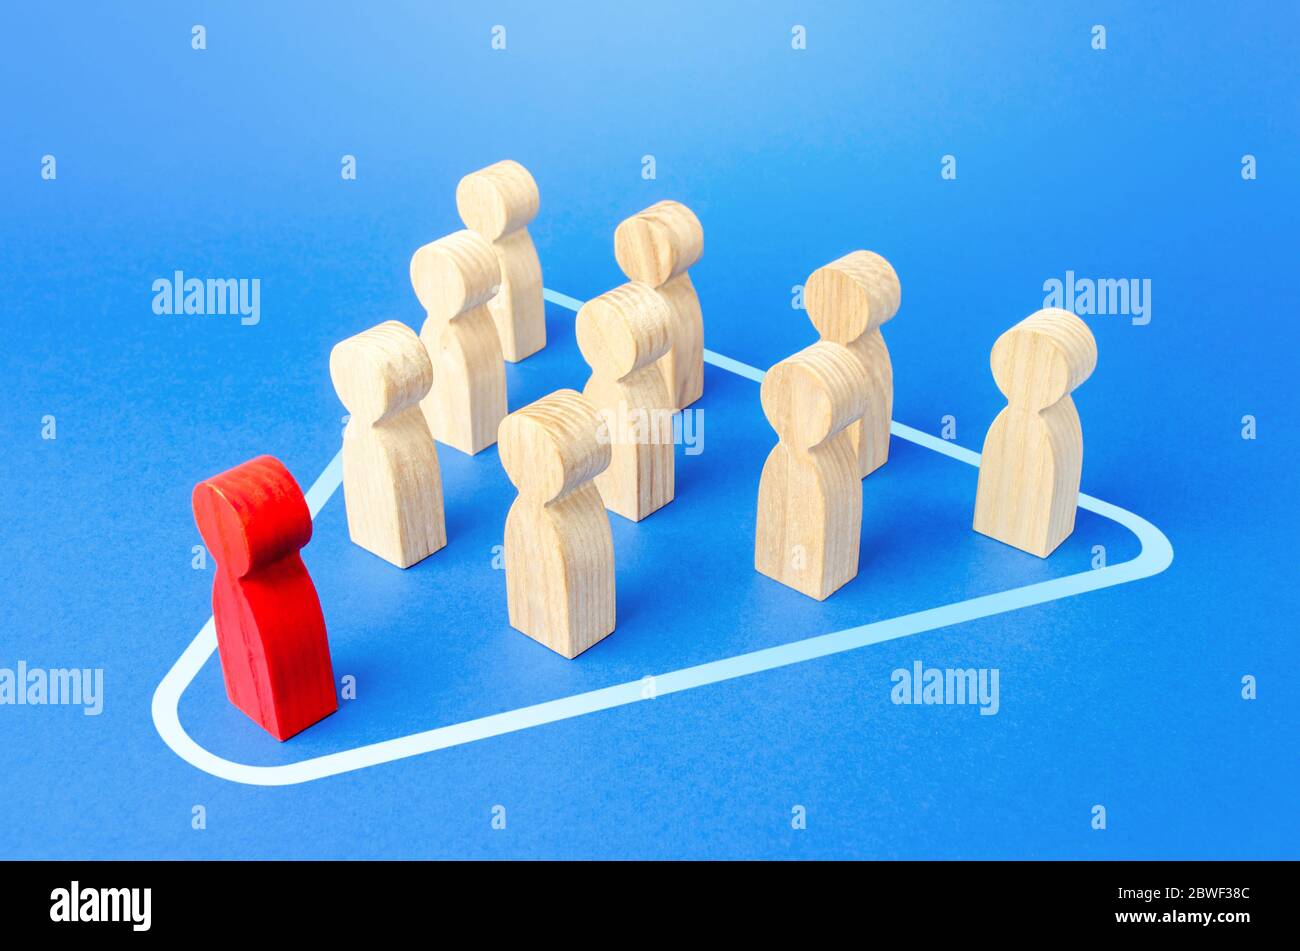 Leader and employees work in one team. Joint efforts to achieve the goal. Teamwork, cooperation and collaboration. Discipline equality, well coordinat Stock Photo